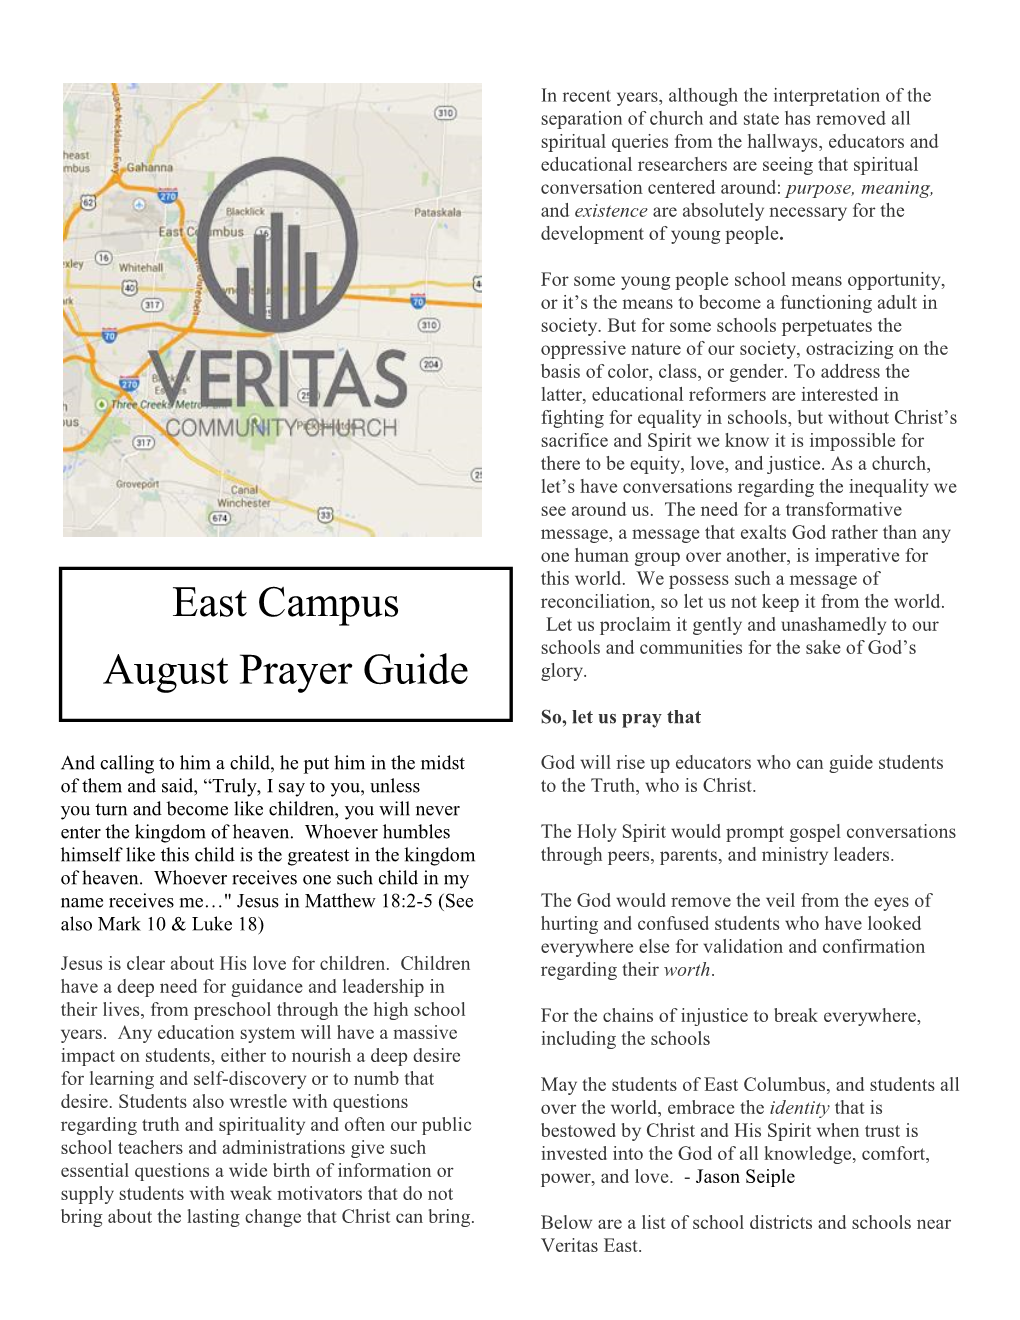 East Campus August Prayer Guide